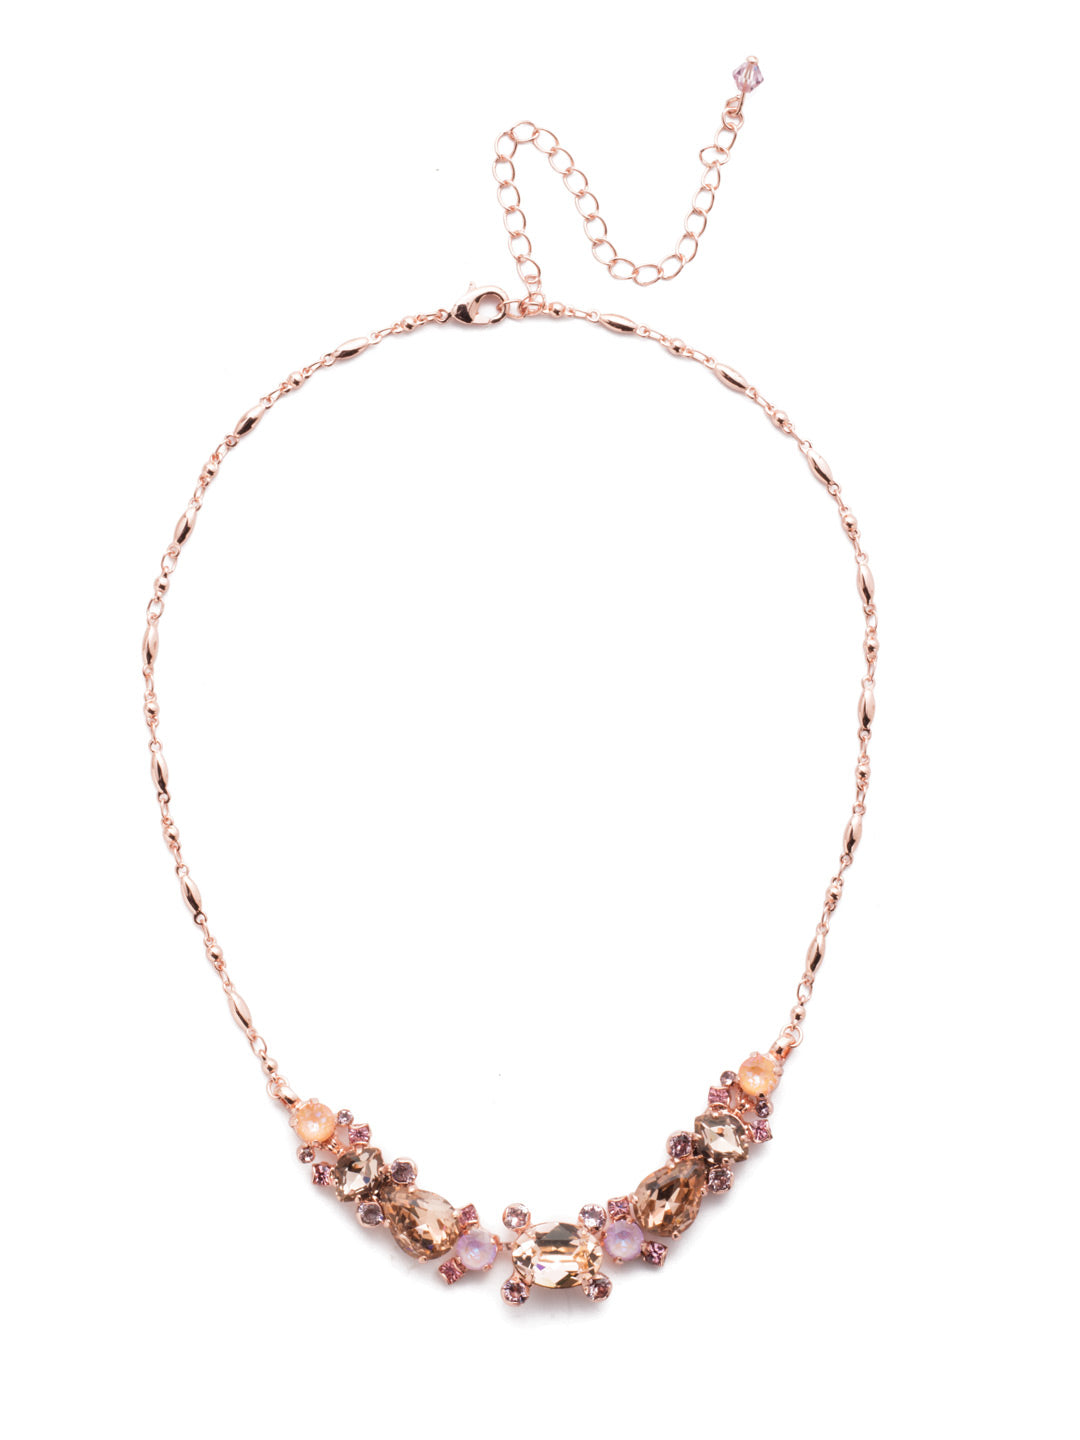 Laurel Tennis Necklace - NDS49RGLVP - <p>A large oval crystal takes center stage in the Laurel necklace, flanked by large pear and marquise cut crystals. Sprinkle in some small round cut stones and you've got the perfect recipe for style! From Sorrelli's Lavender Peach collection in our Rose Gold-tone finish.</p>